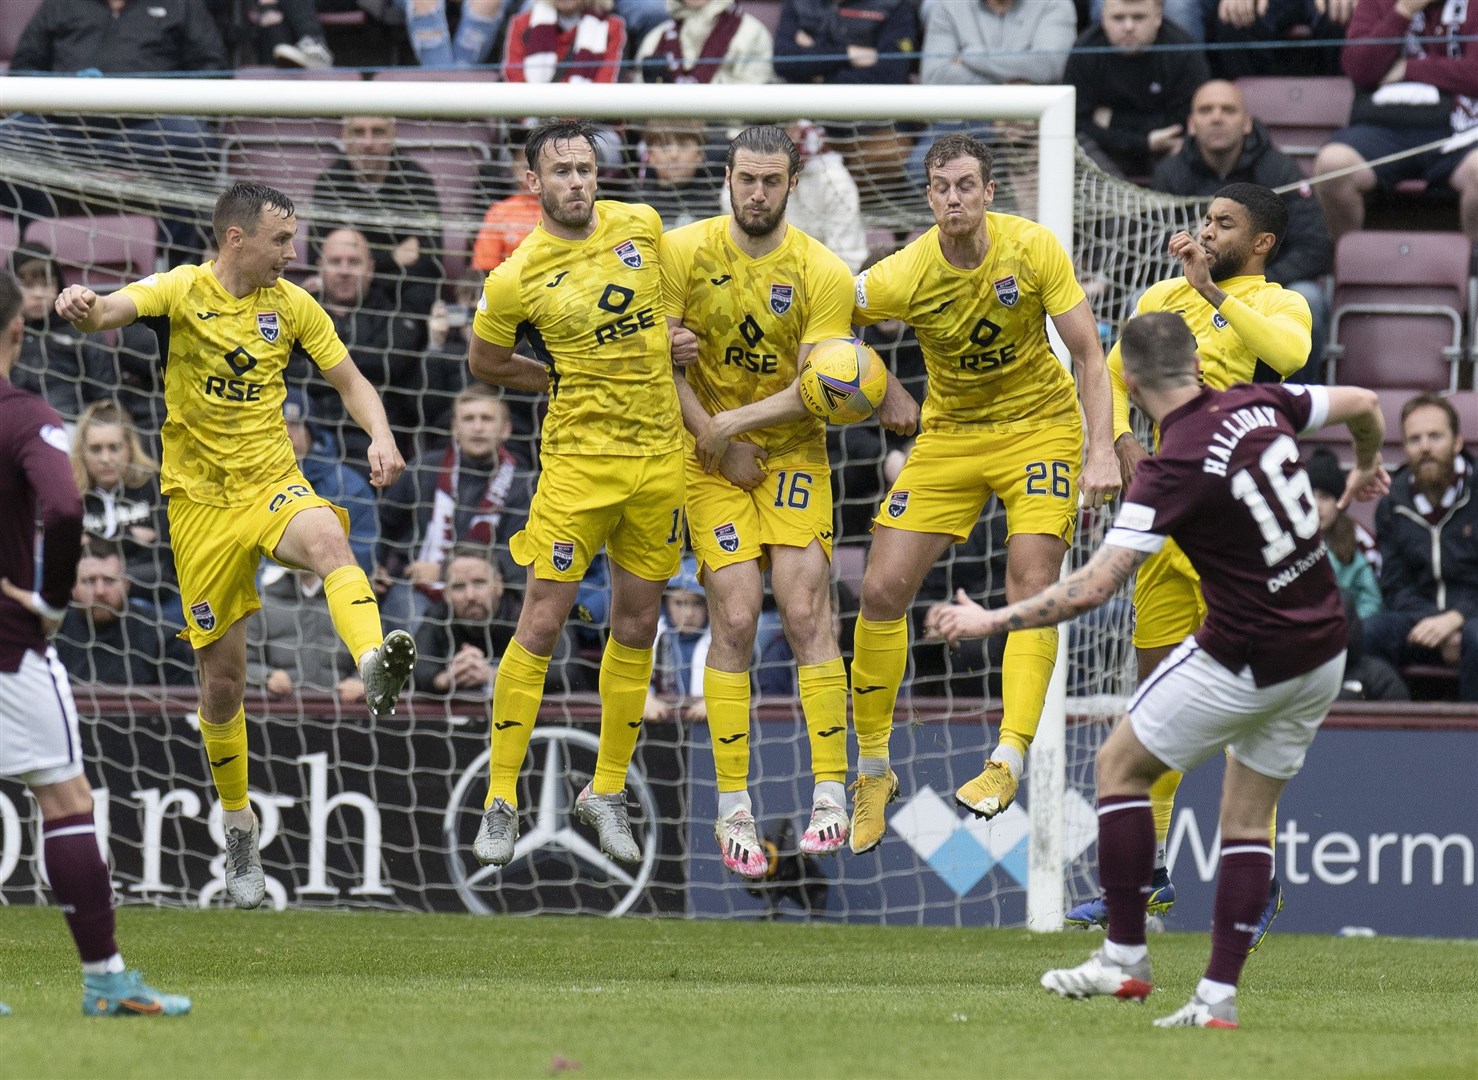 Picture - Ken Macpherson. Hearts(0) v Ross County(0). 30.04.22. The perfect Ross County wall blocks this free-kick from Hearts' Andrew Halliday.